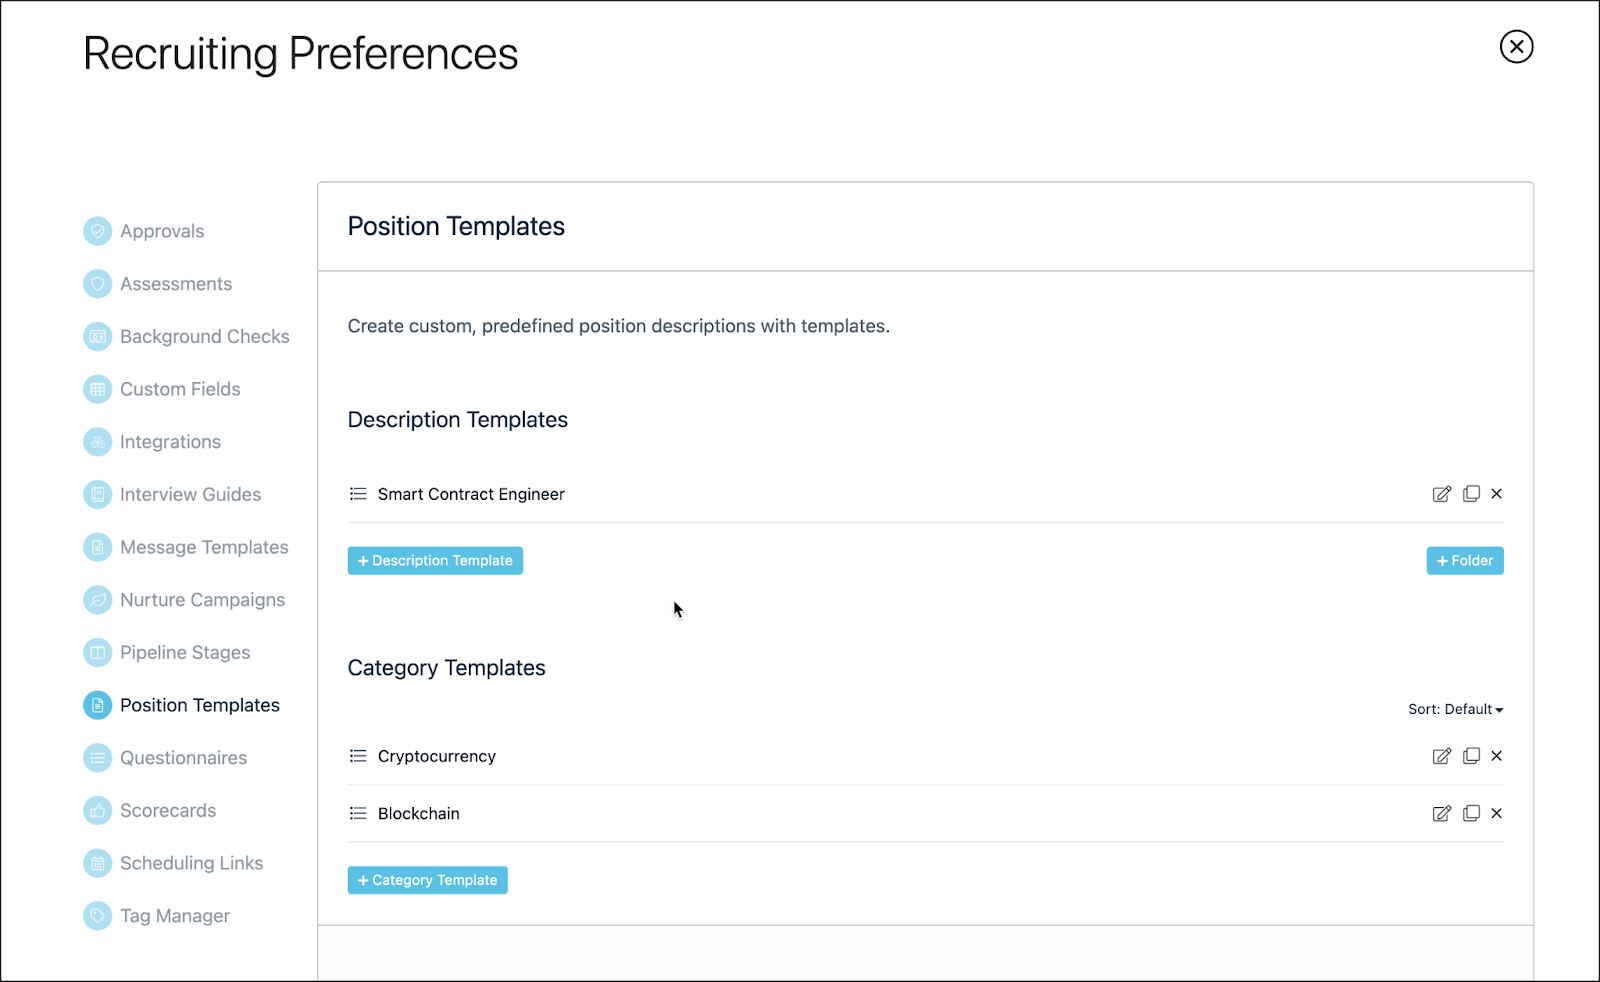 Position templates in Breezy recruiting preferences